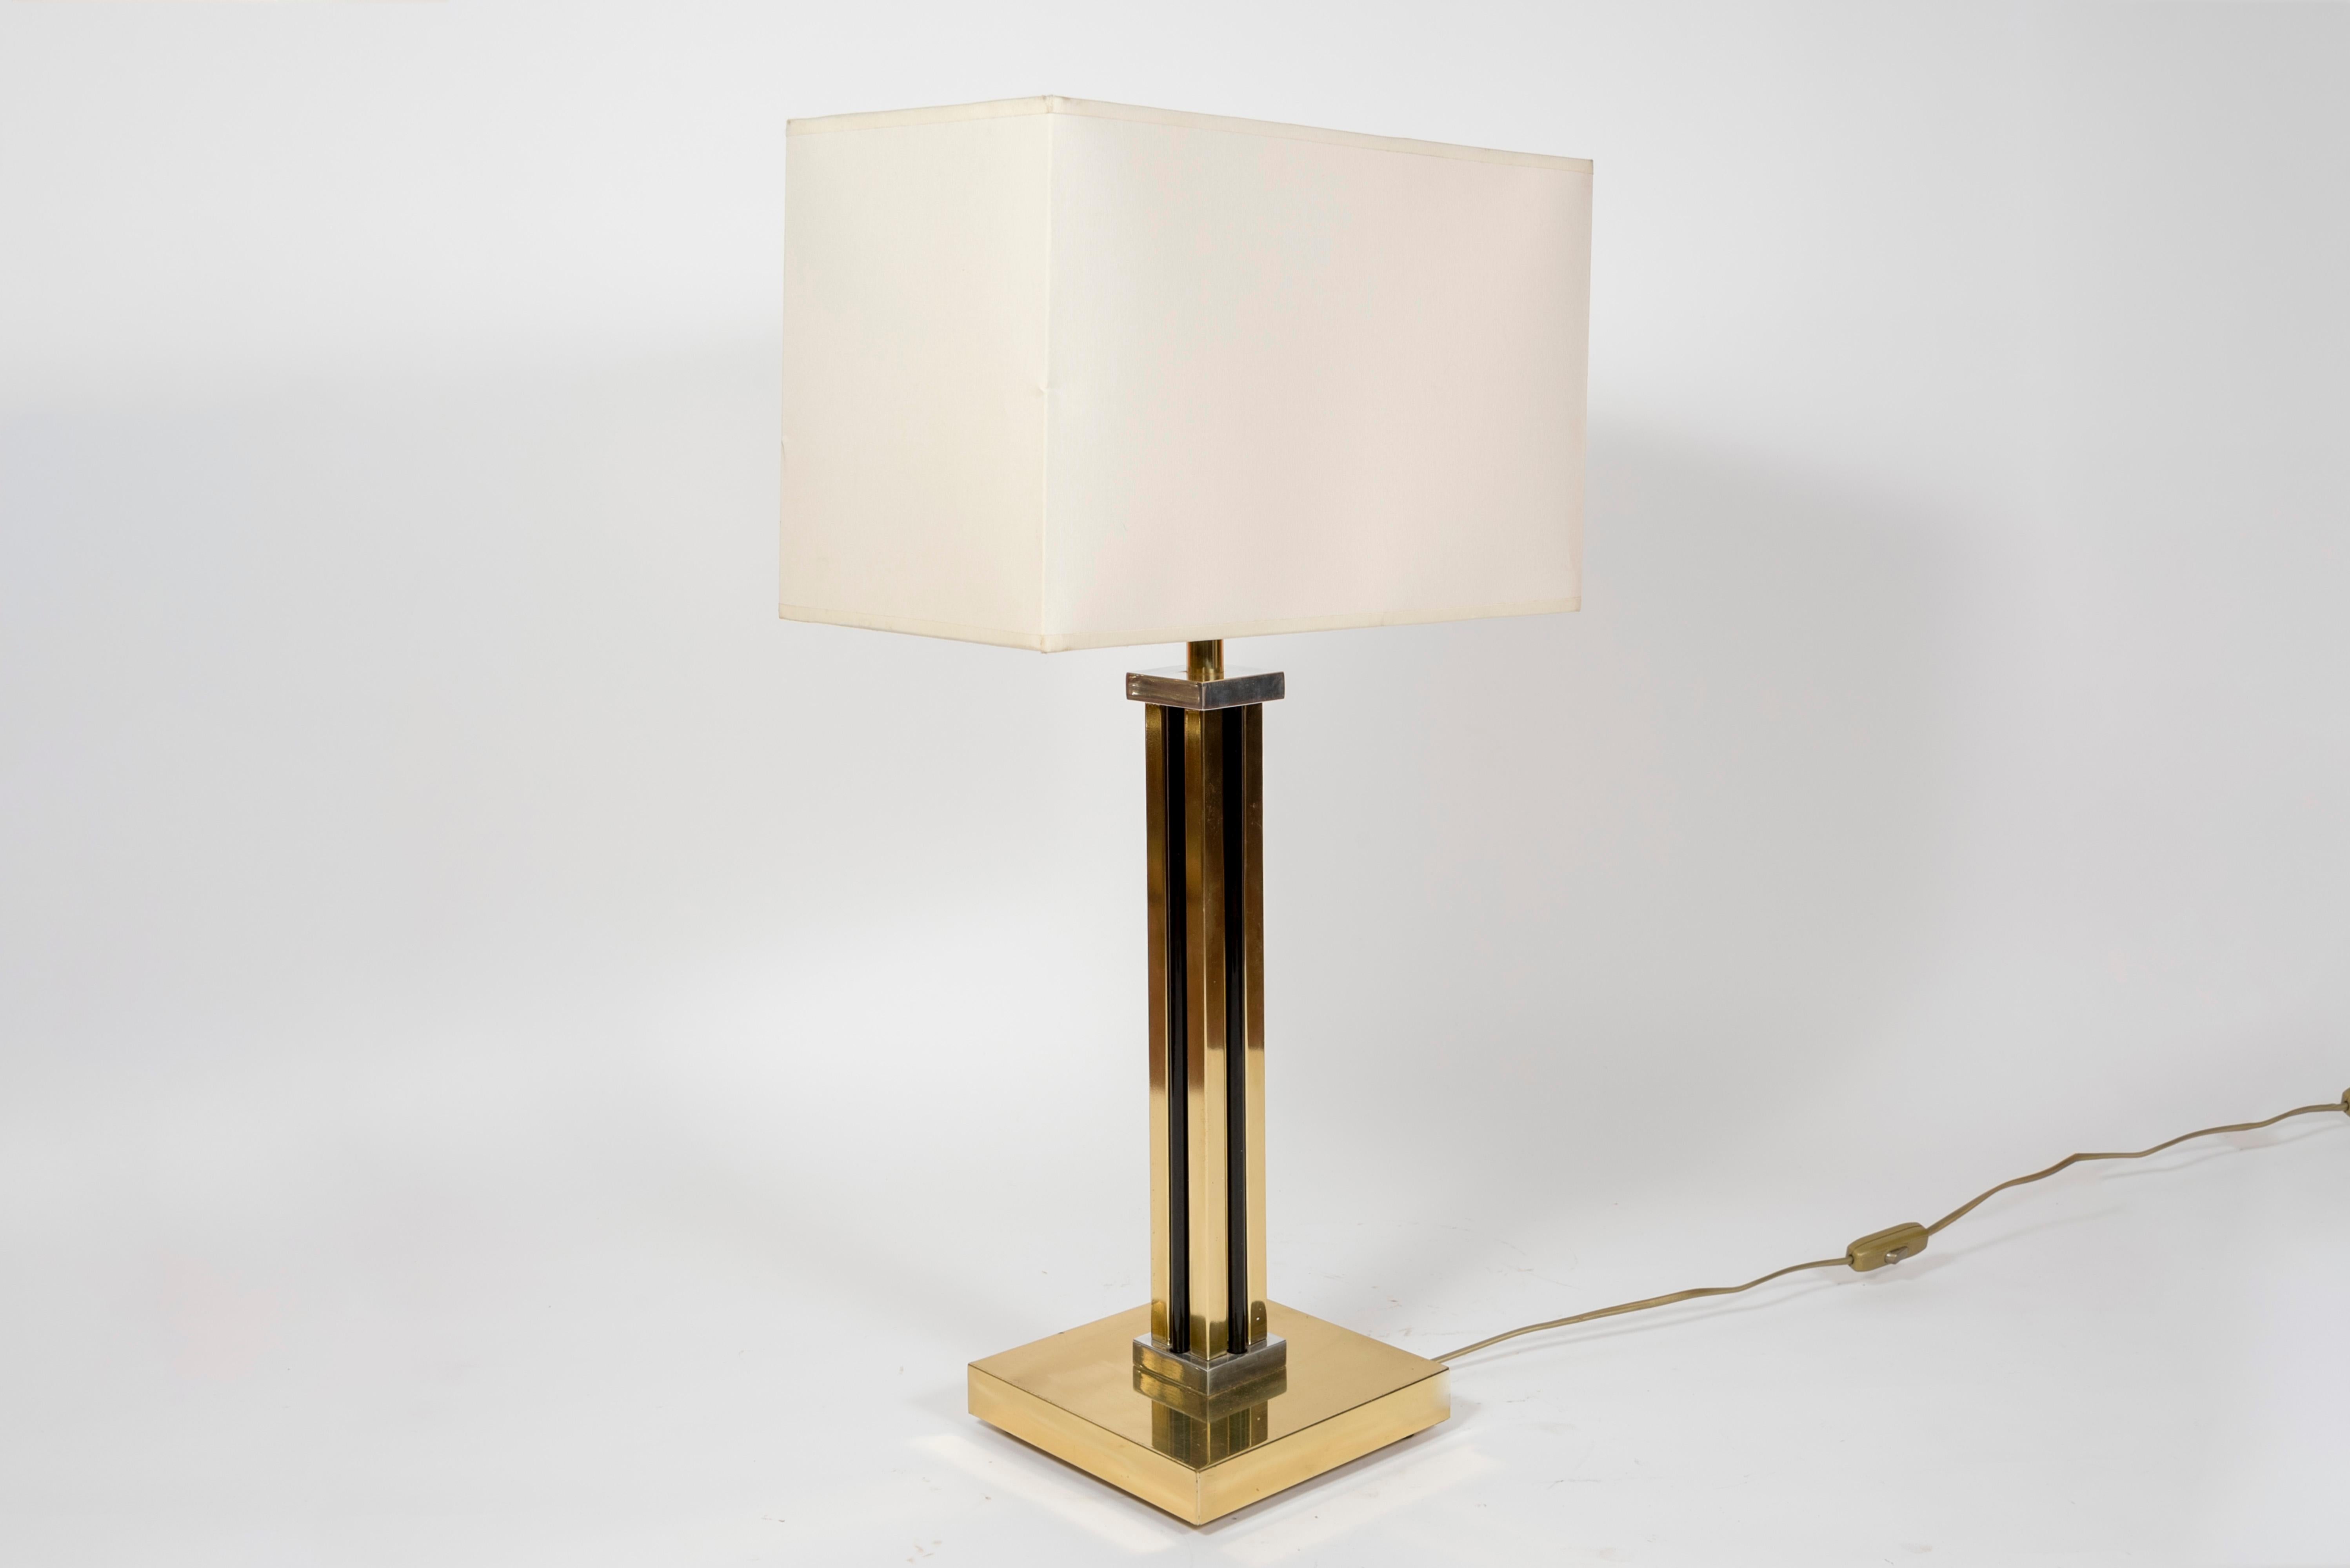 Pair of table lamps in the Style of Archimede Seguso,
Italy,
circa 1980
Dimensions given without shade
No shade provided.